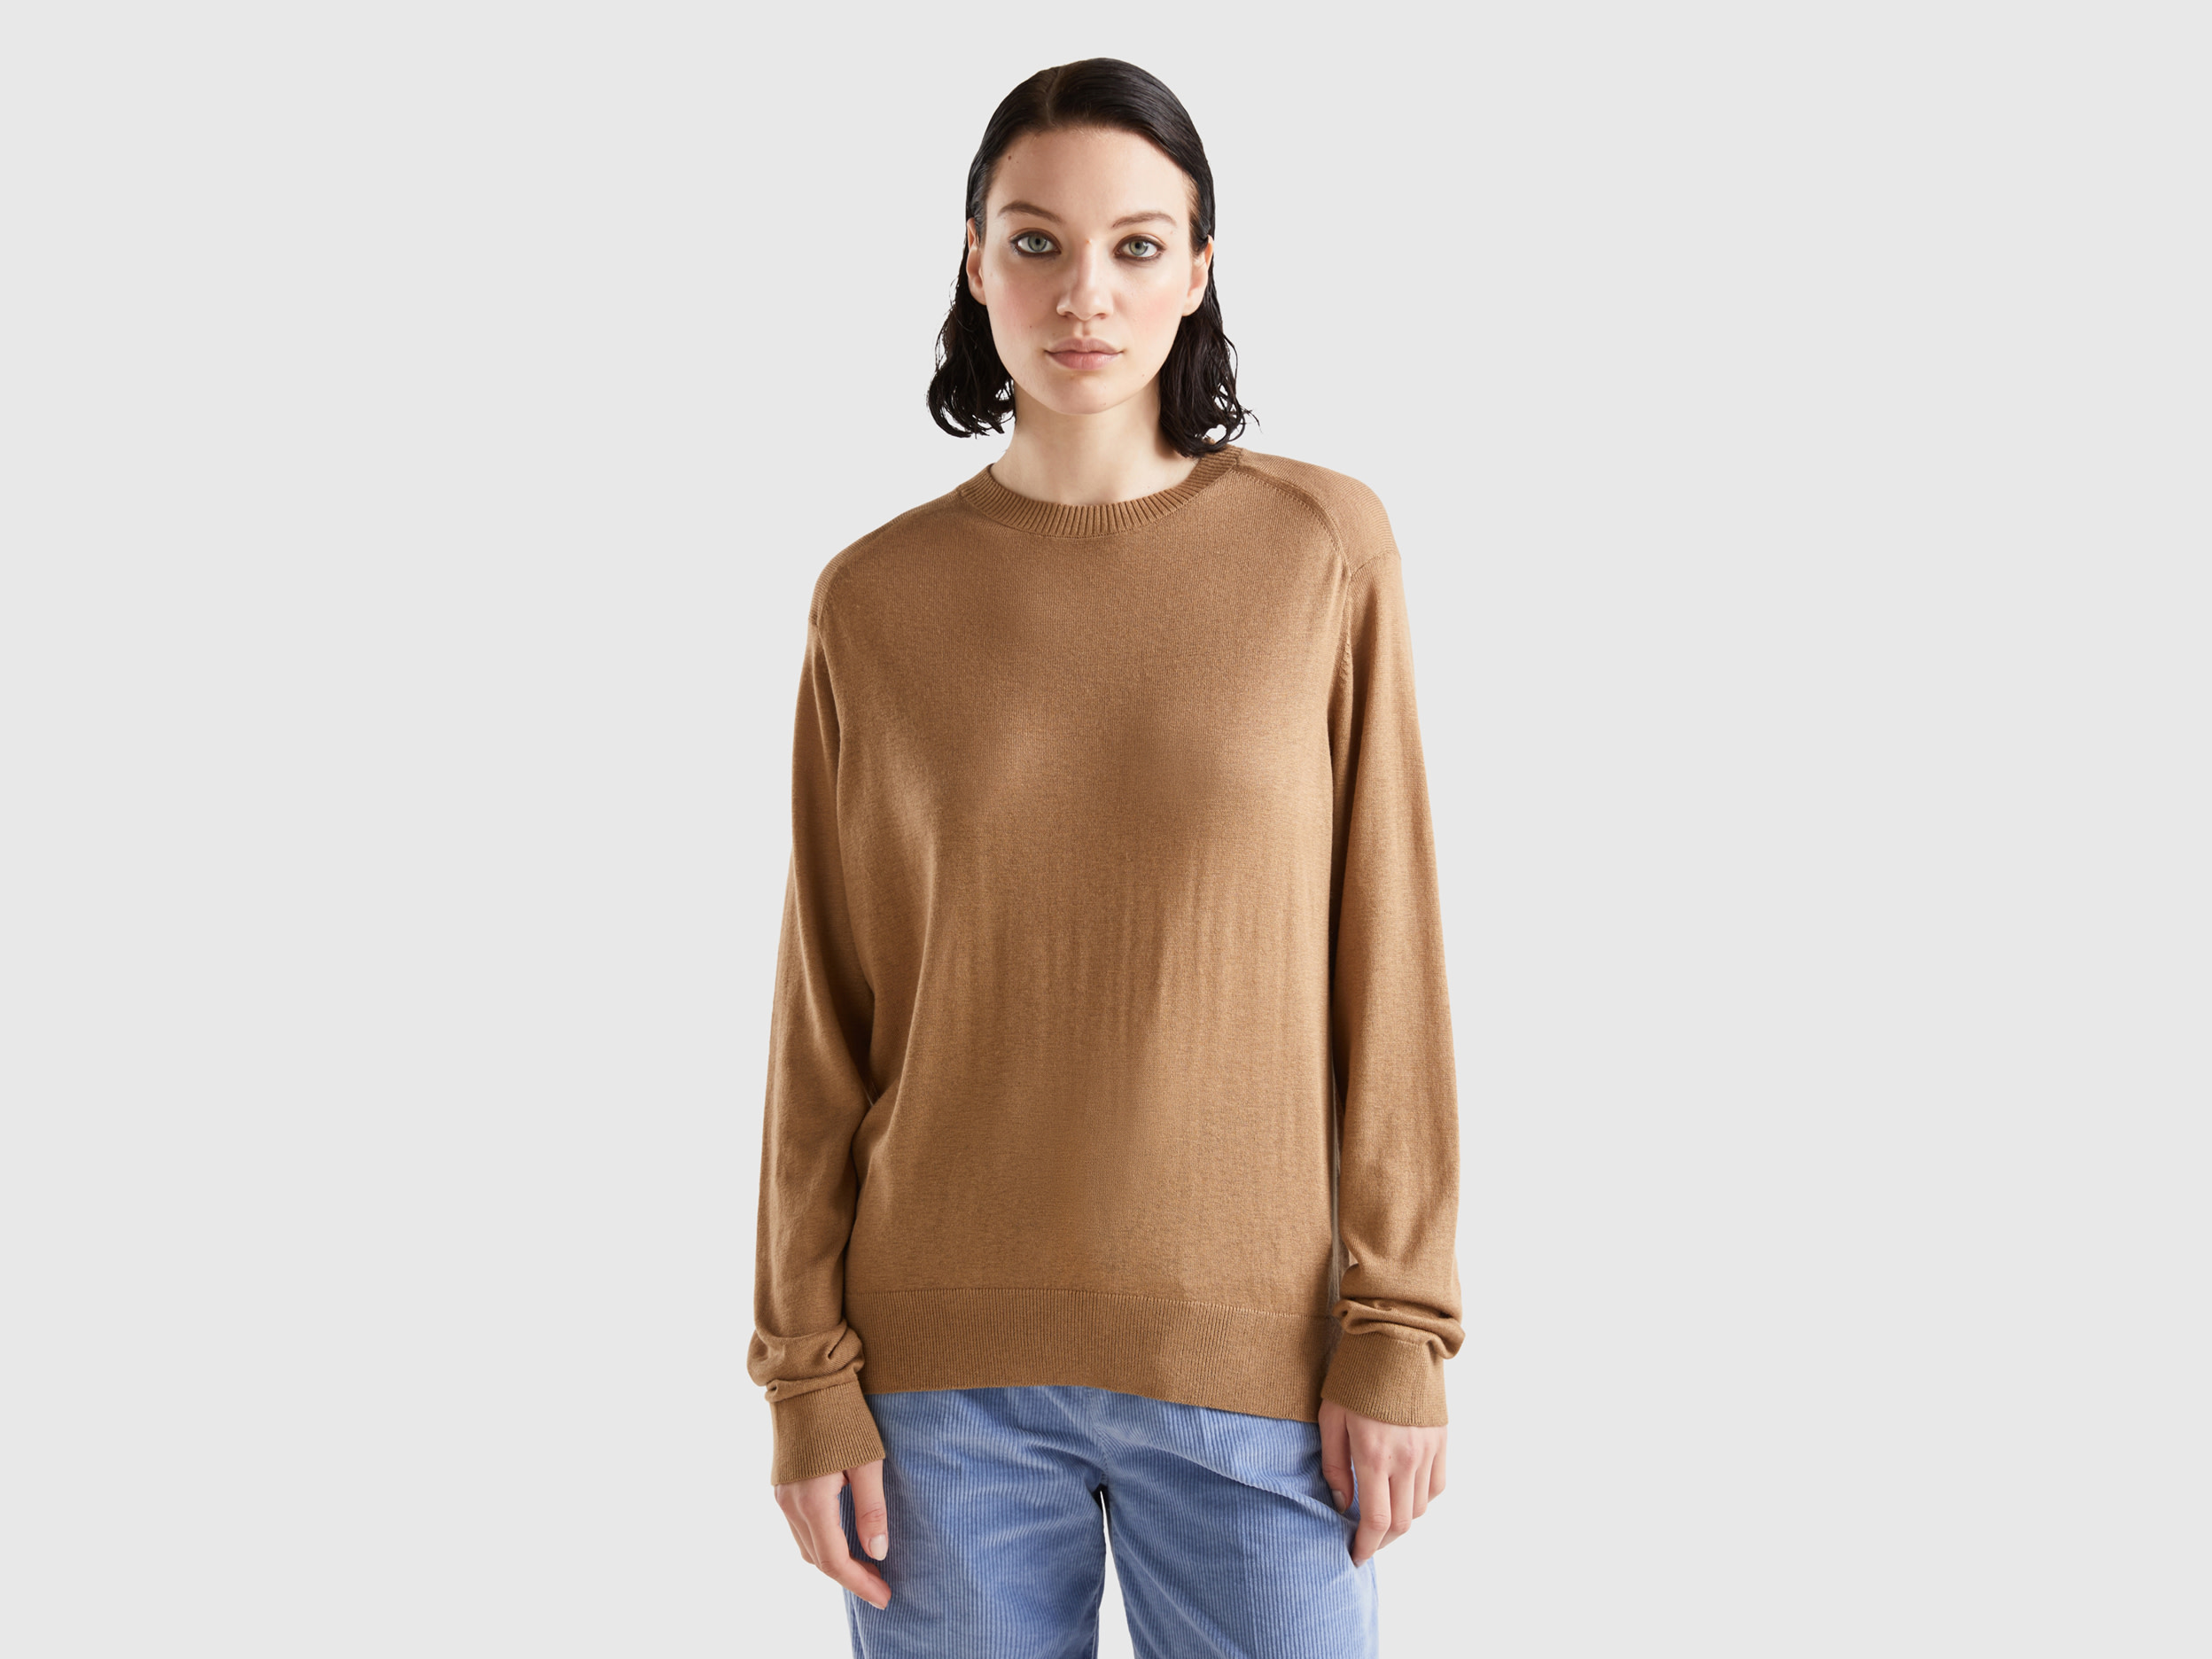 Benetton, Sweater In Viscose Blend With Slits, size M, Camel, Women